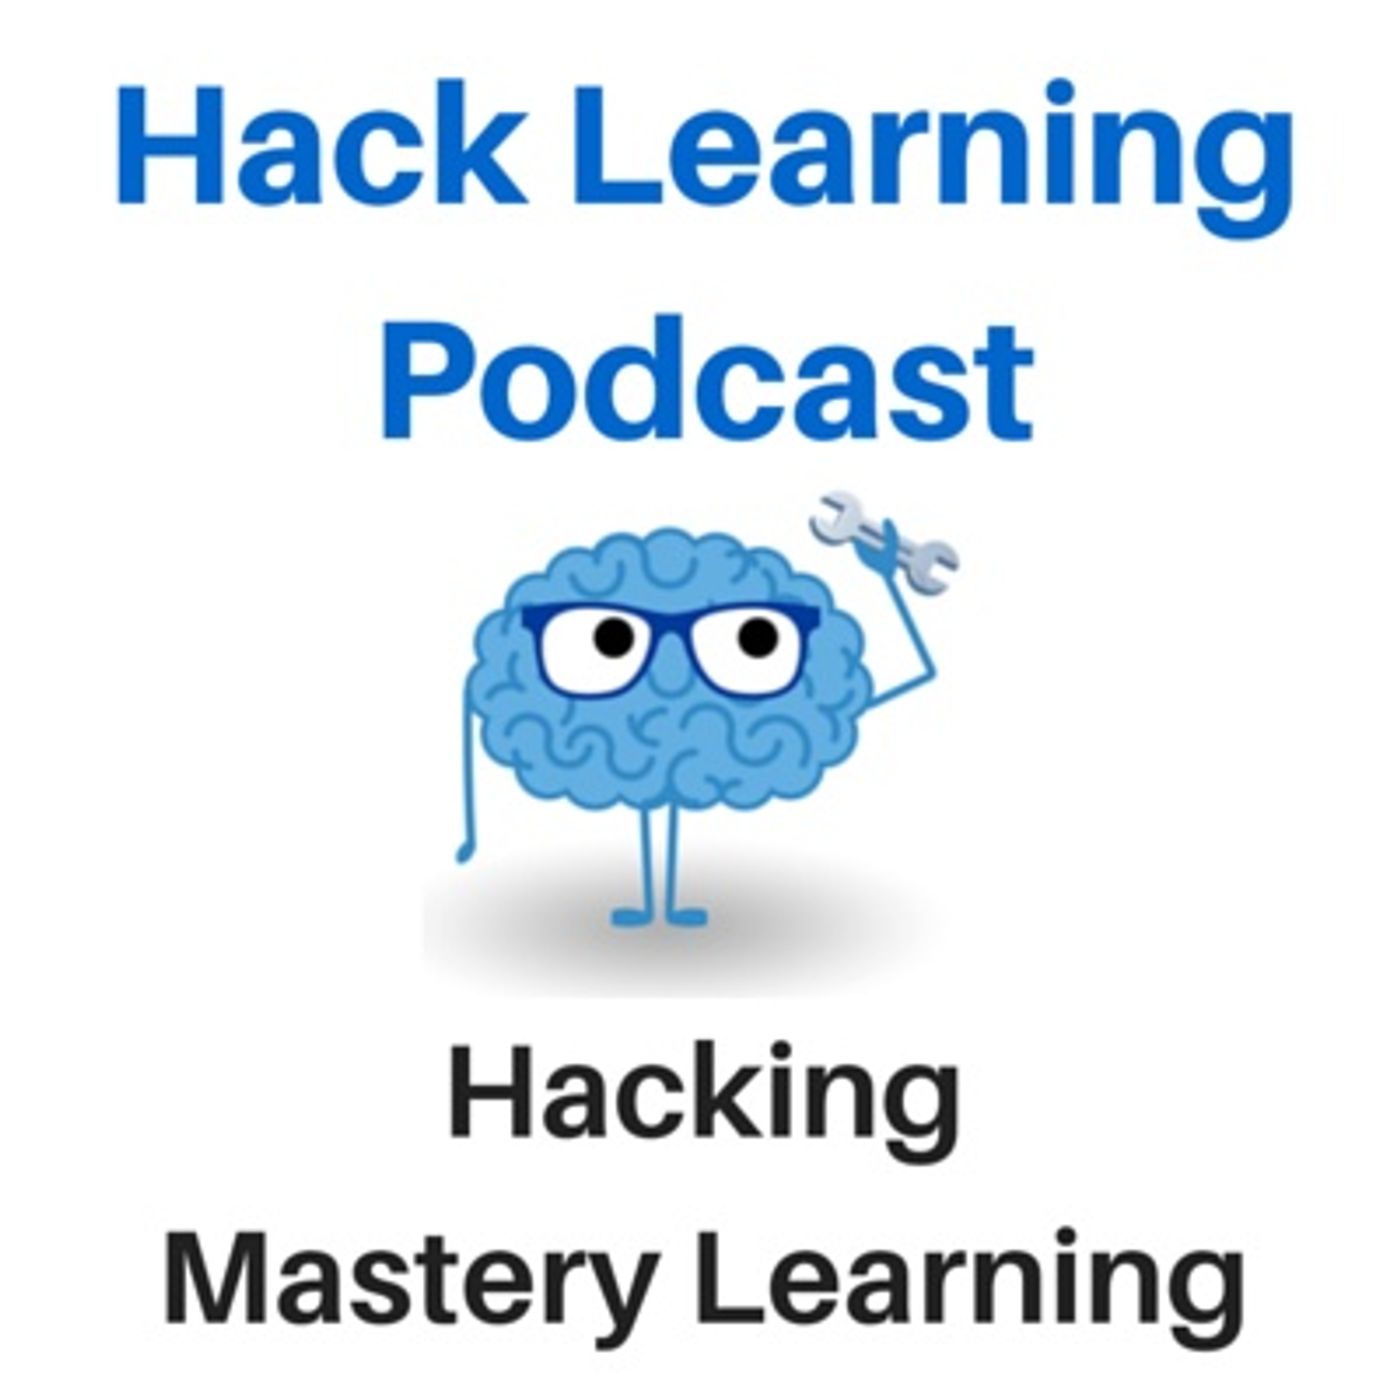 Hacking Mastery Learning